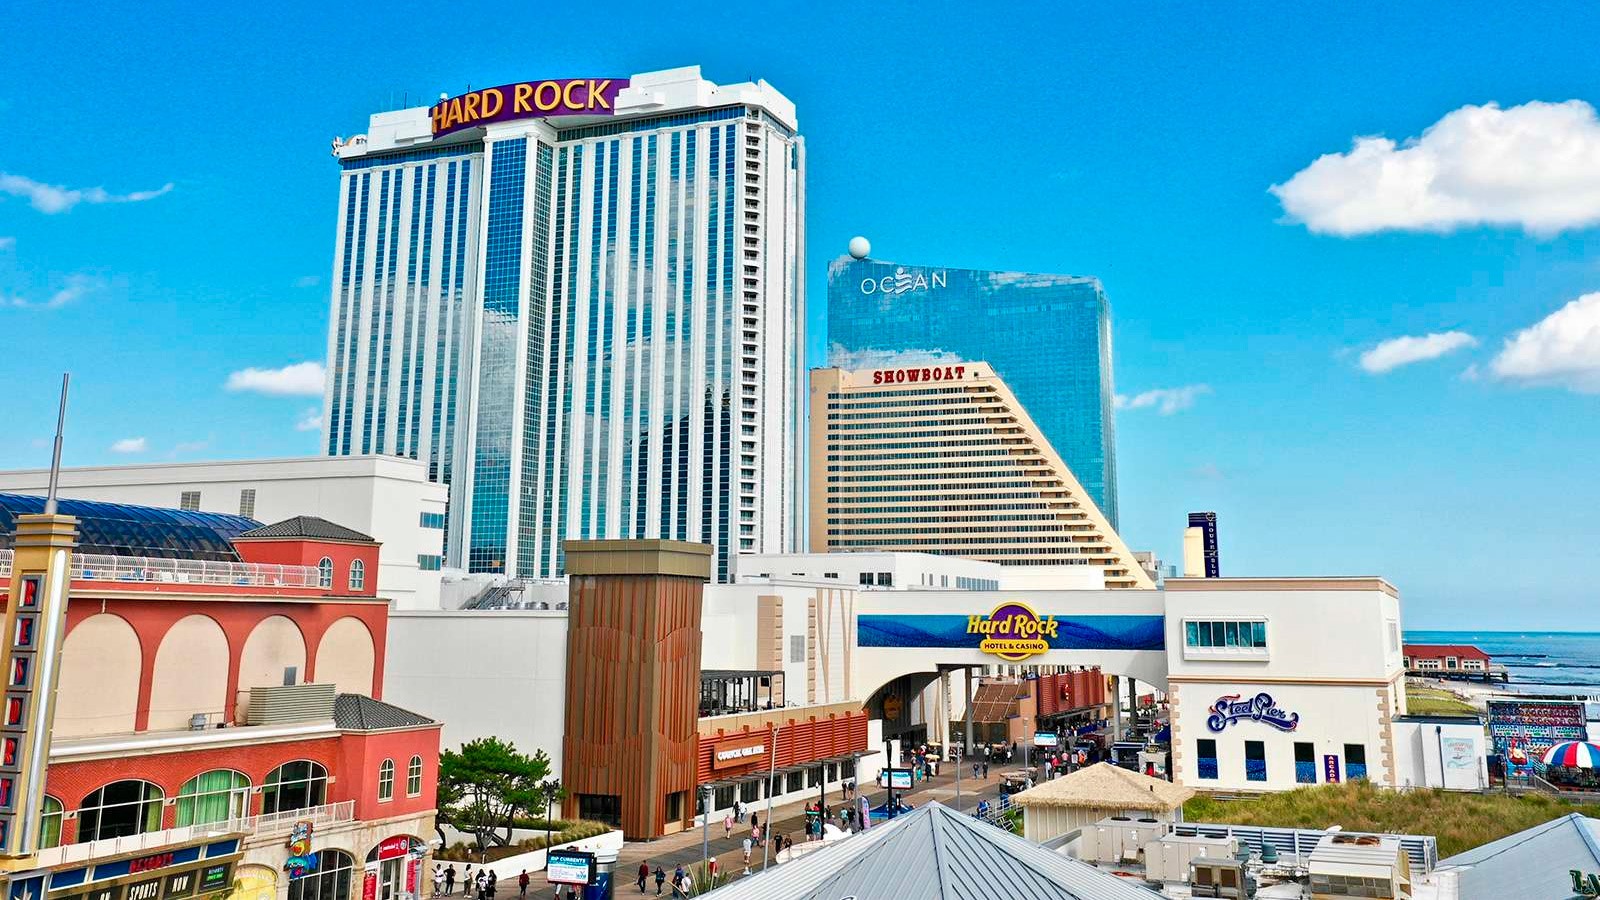 A CALL TO RE-OPEN ATLANTIC CITY CASINOS BY JULY 4 